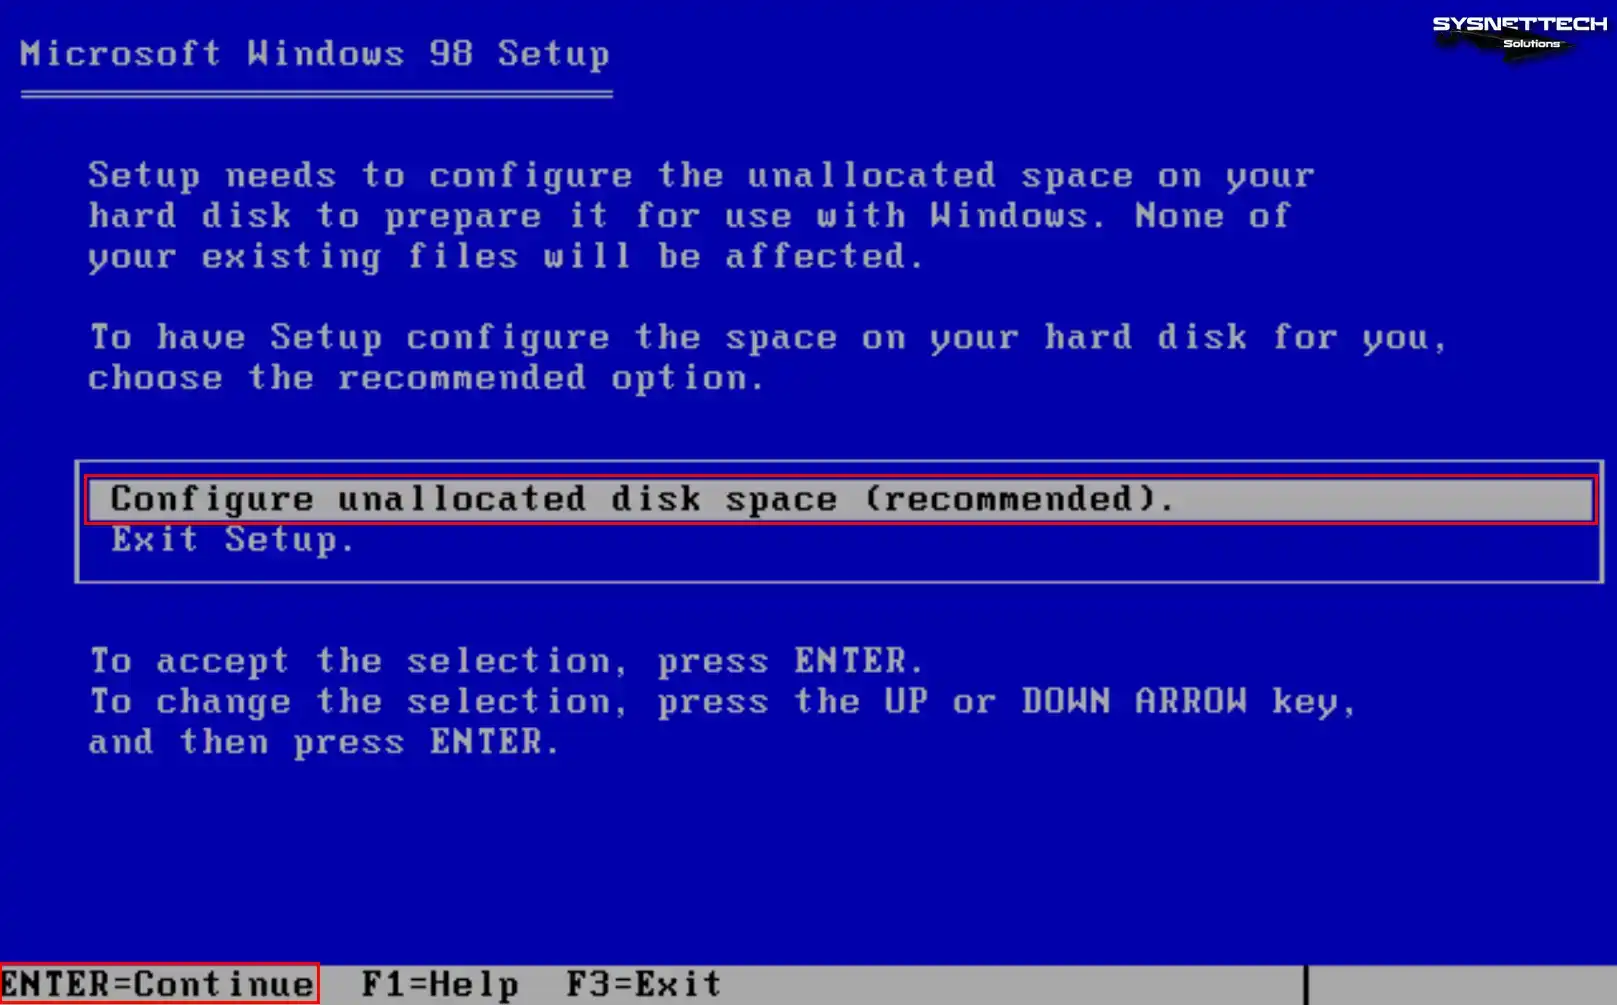 Configuring Unallocated Disk Space